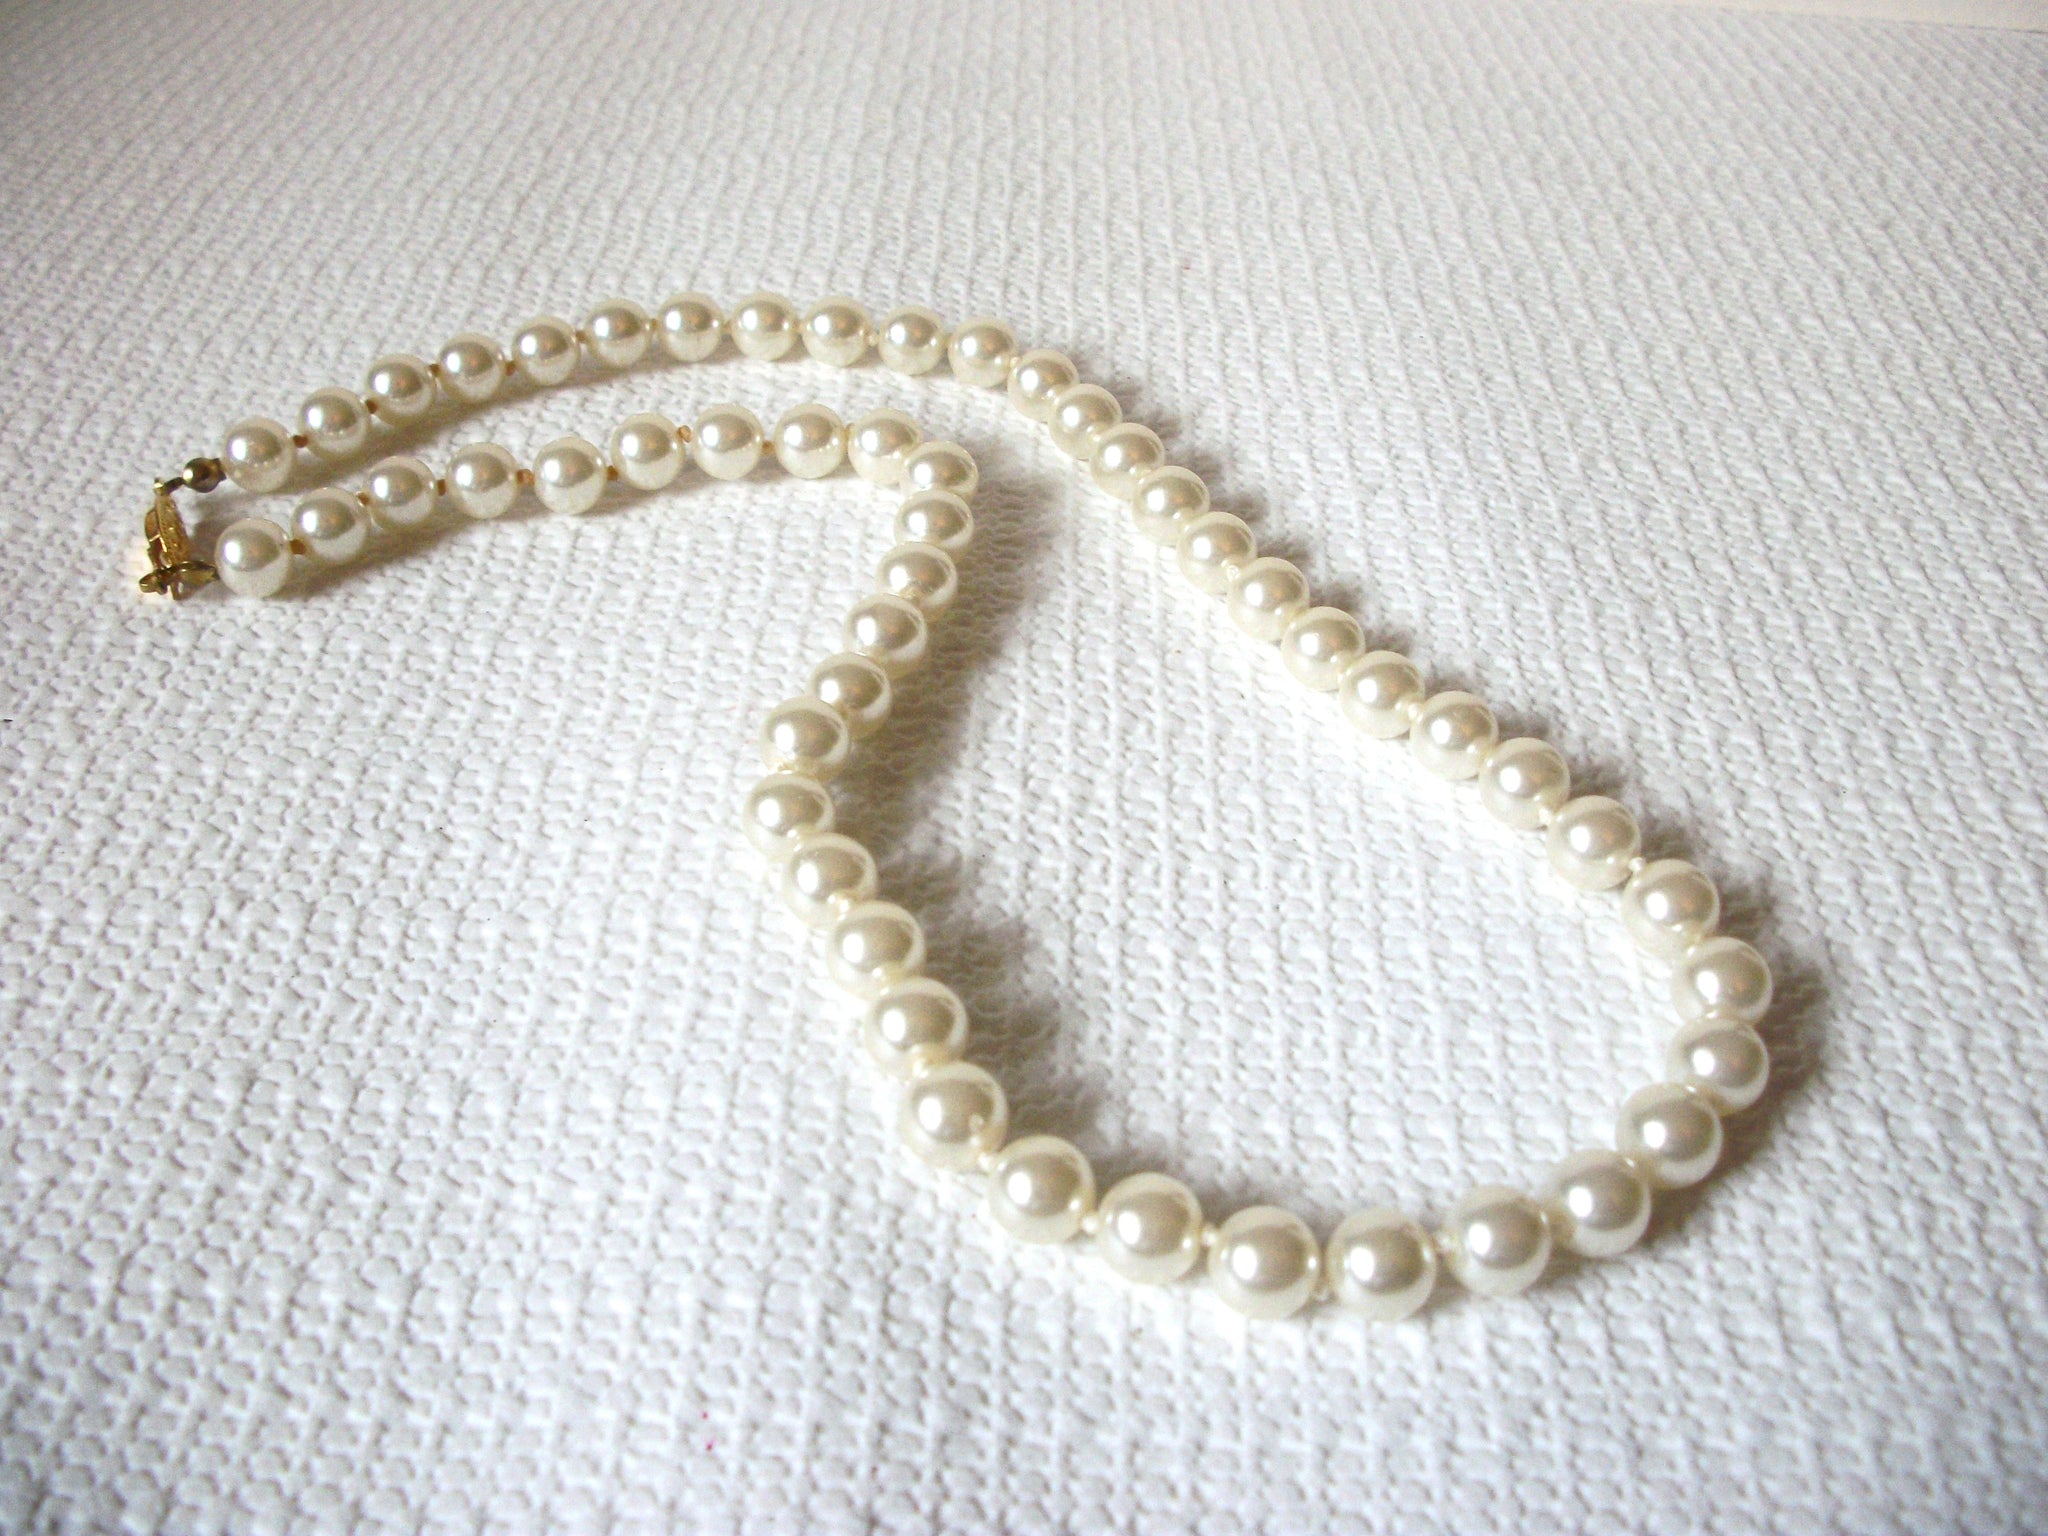 Vintage Glass Pearls Necklace 40620